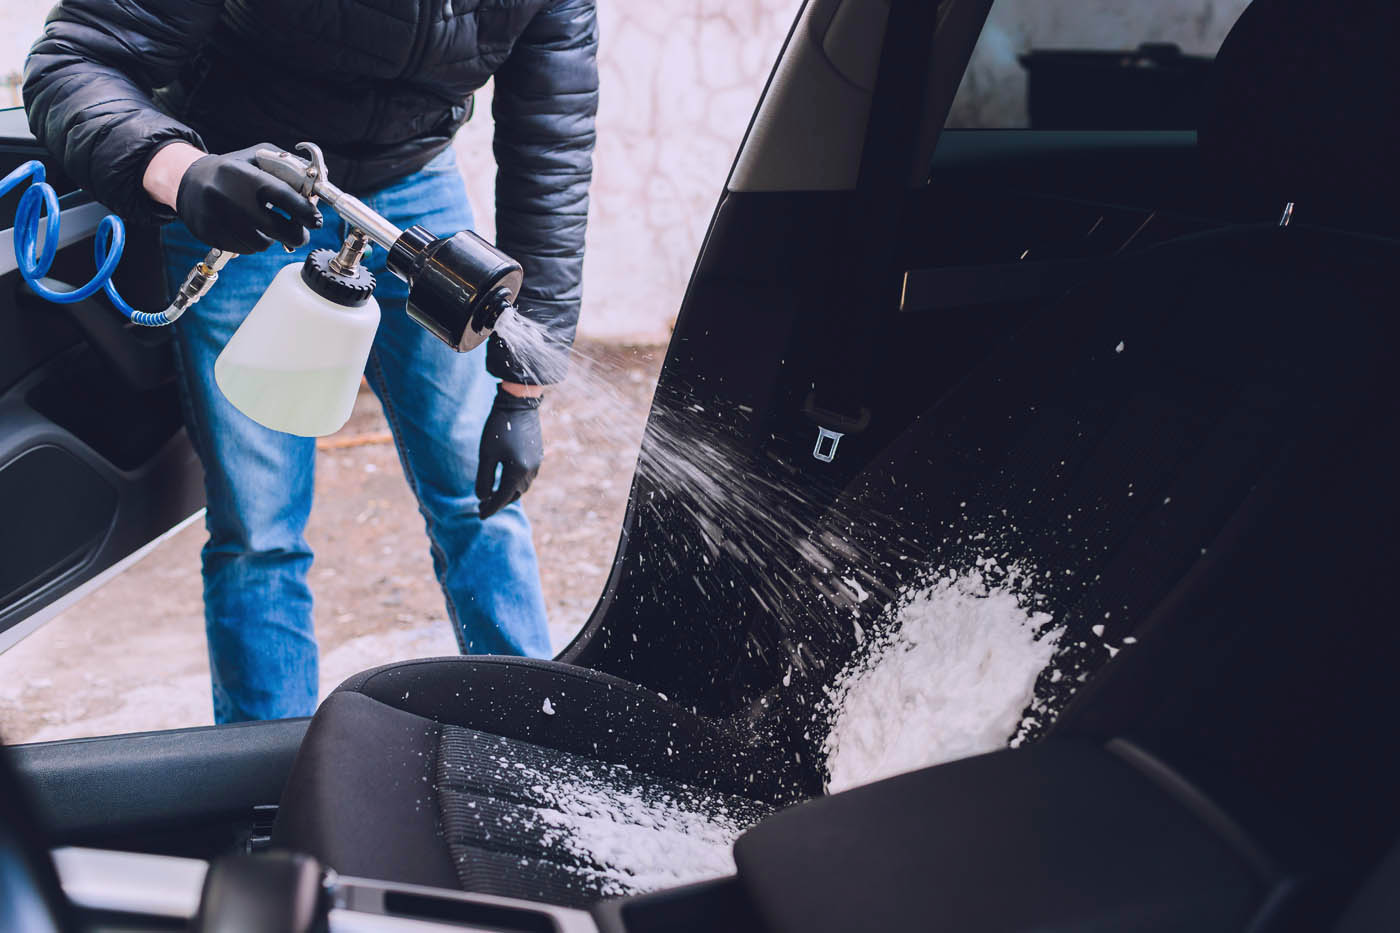 Dapper Pros professionals using safe equipment and cleaning supplies to do car deep cleaning.